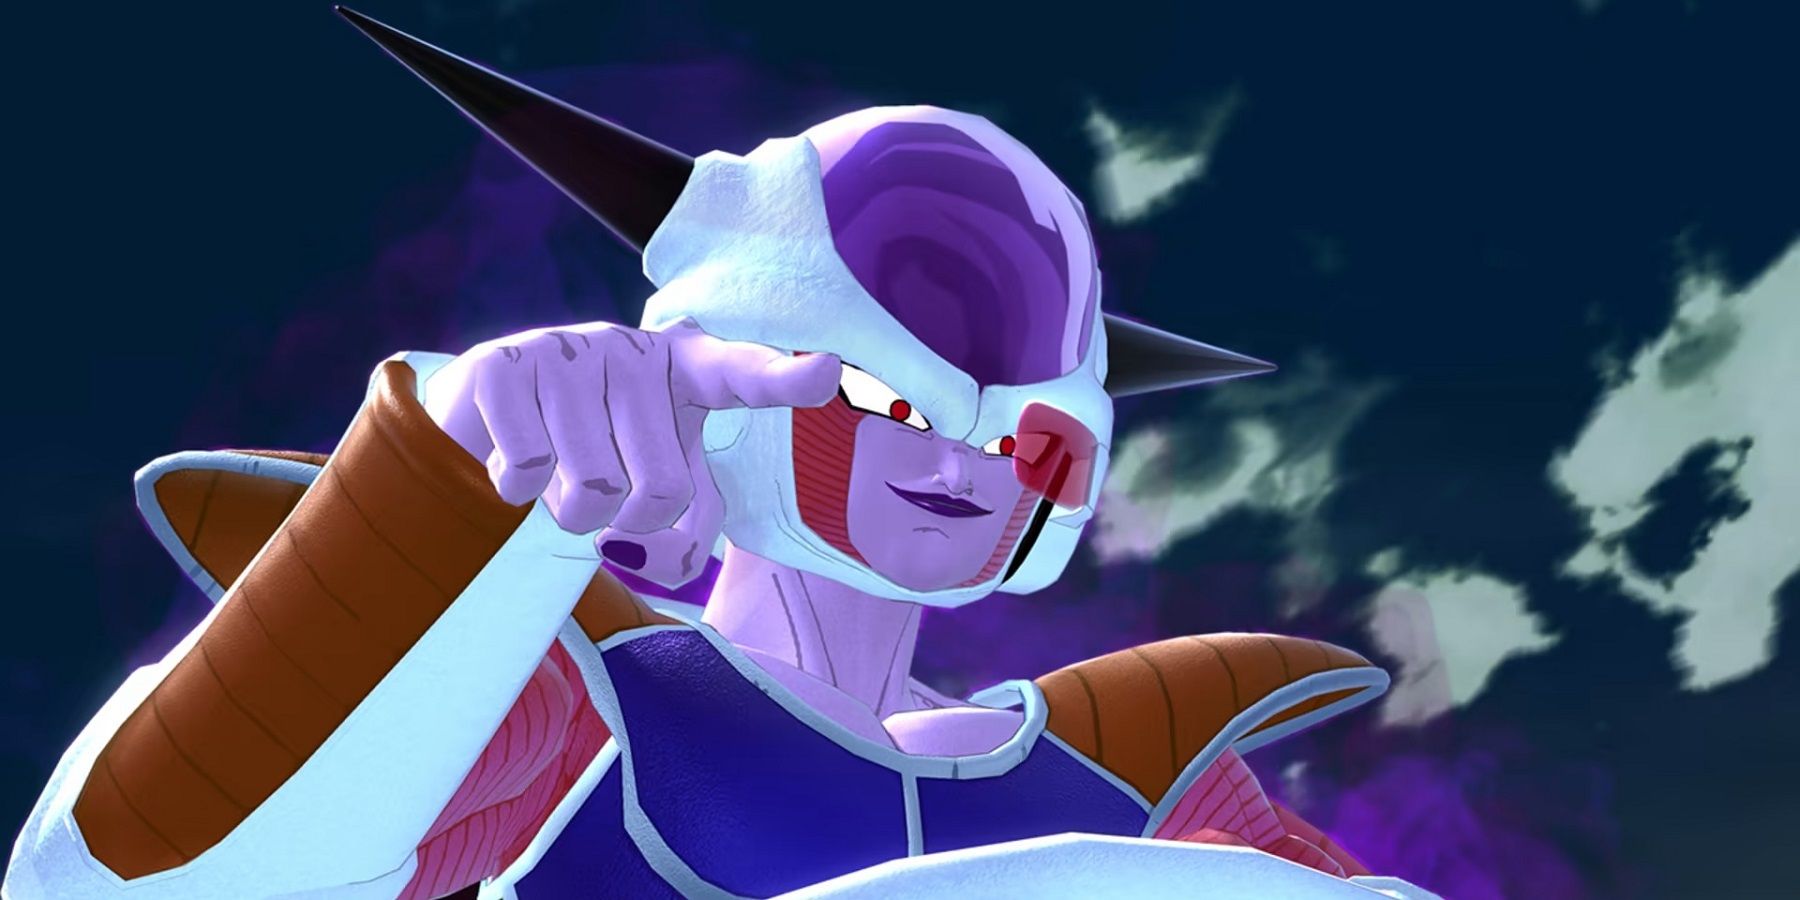 Dragon Ball: The Breakers version 2.0 update patch notes